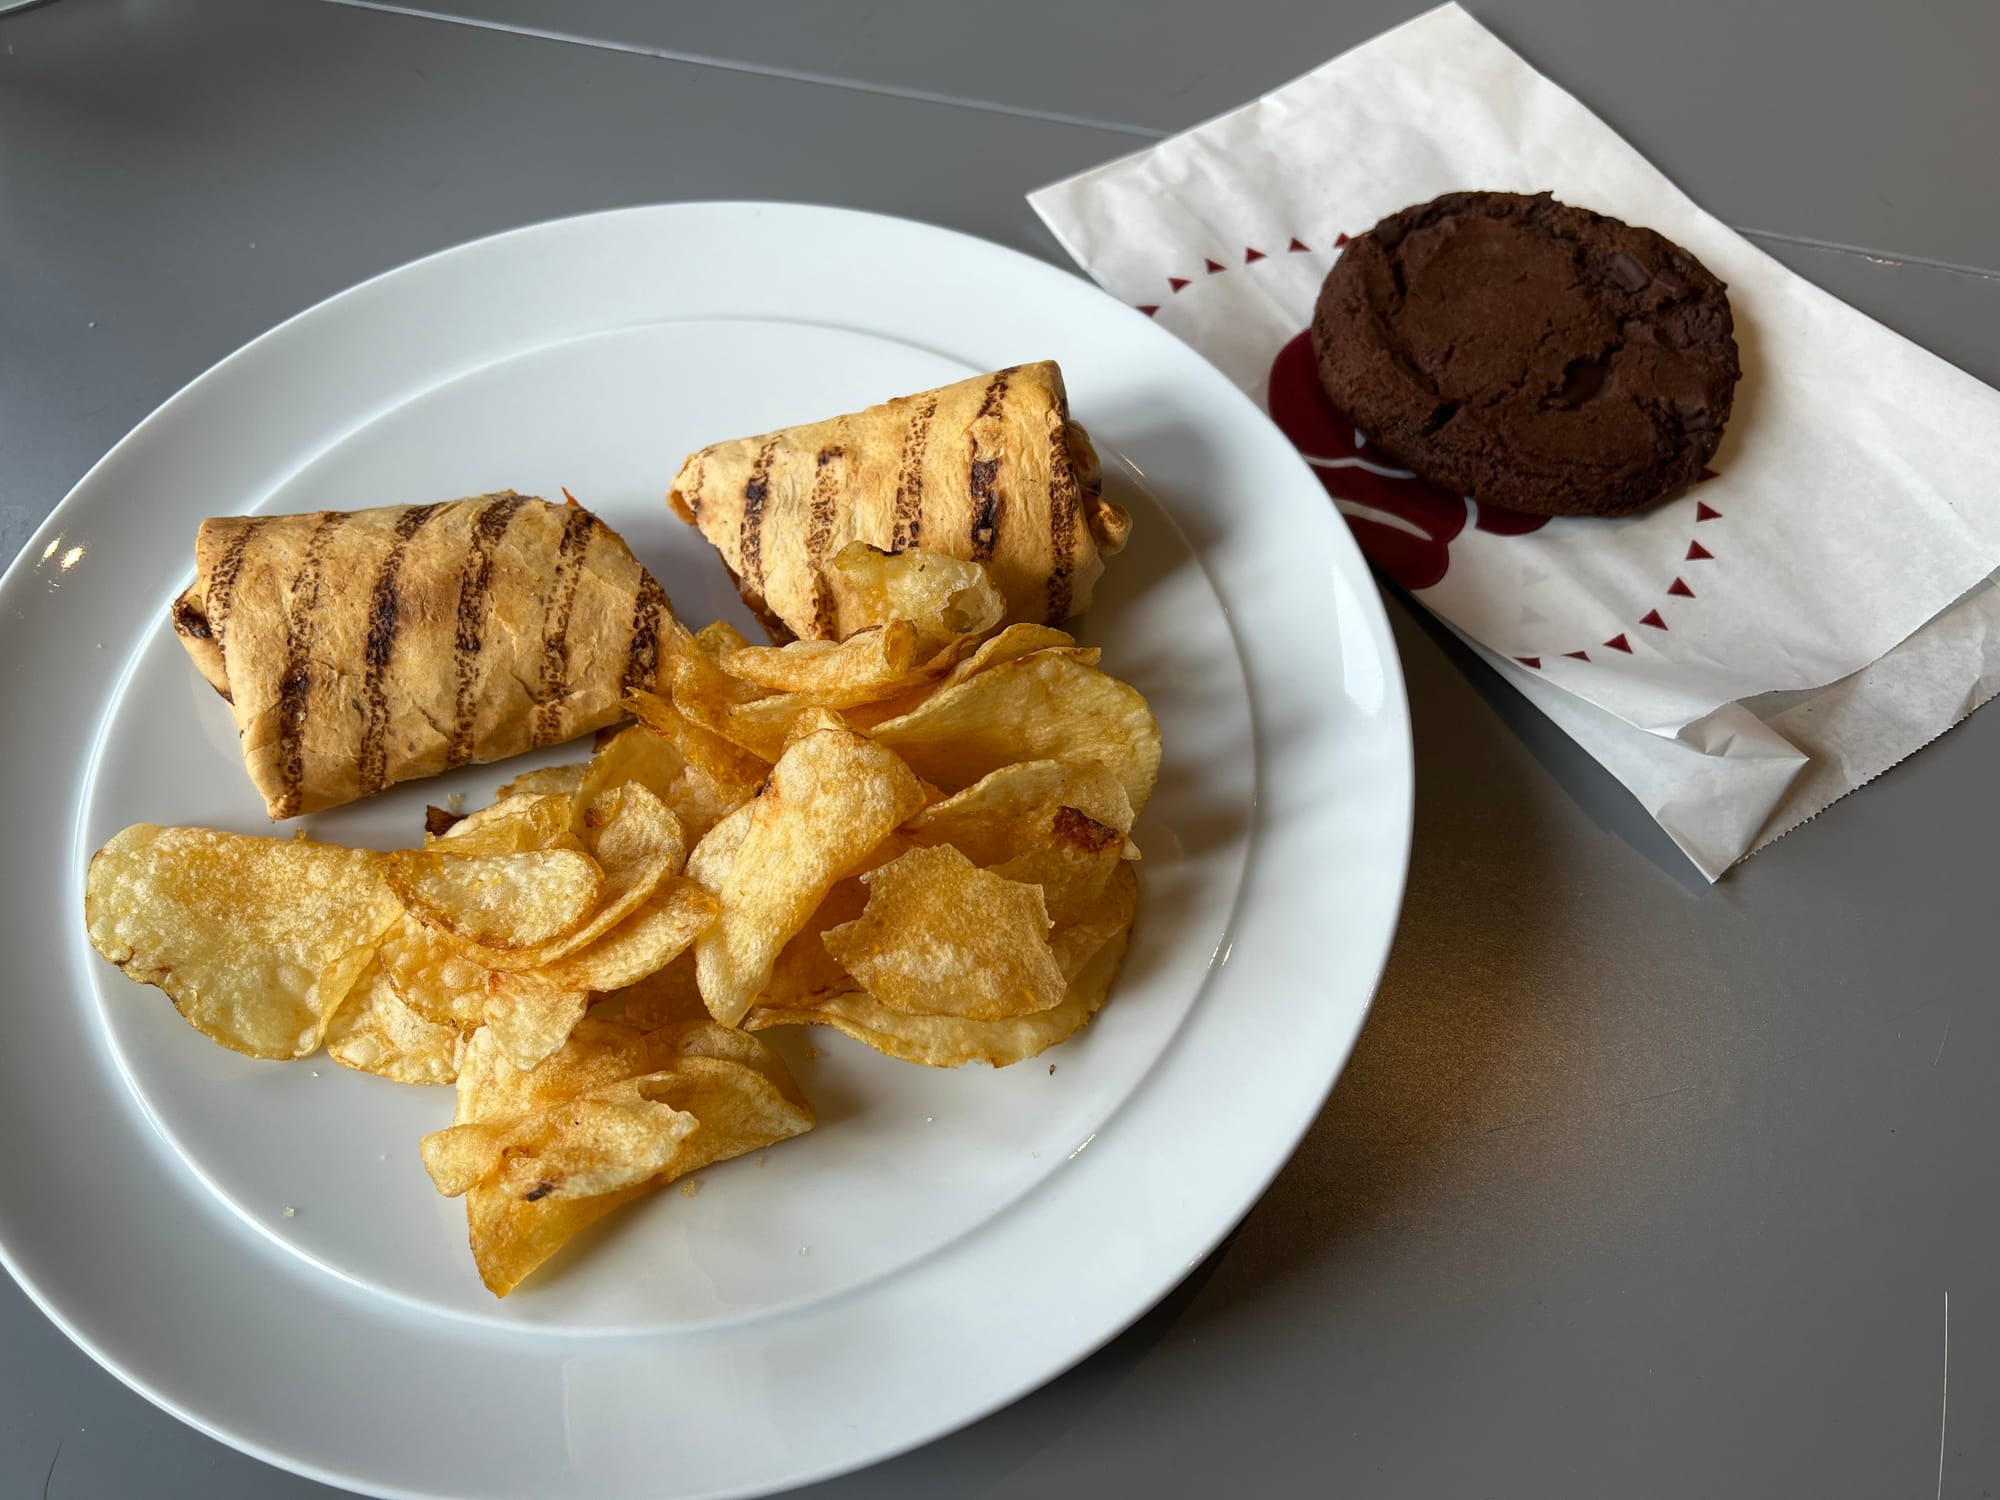 A wrap with grill marks on a plate with some crisps. A chocolate cookie on a Costa to-go wrapper sits next to the plate.